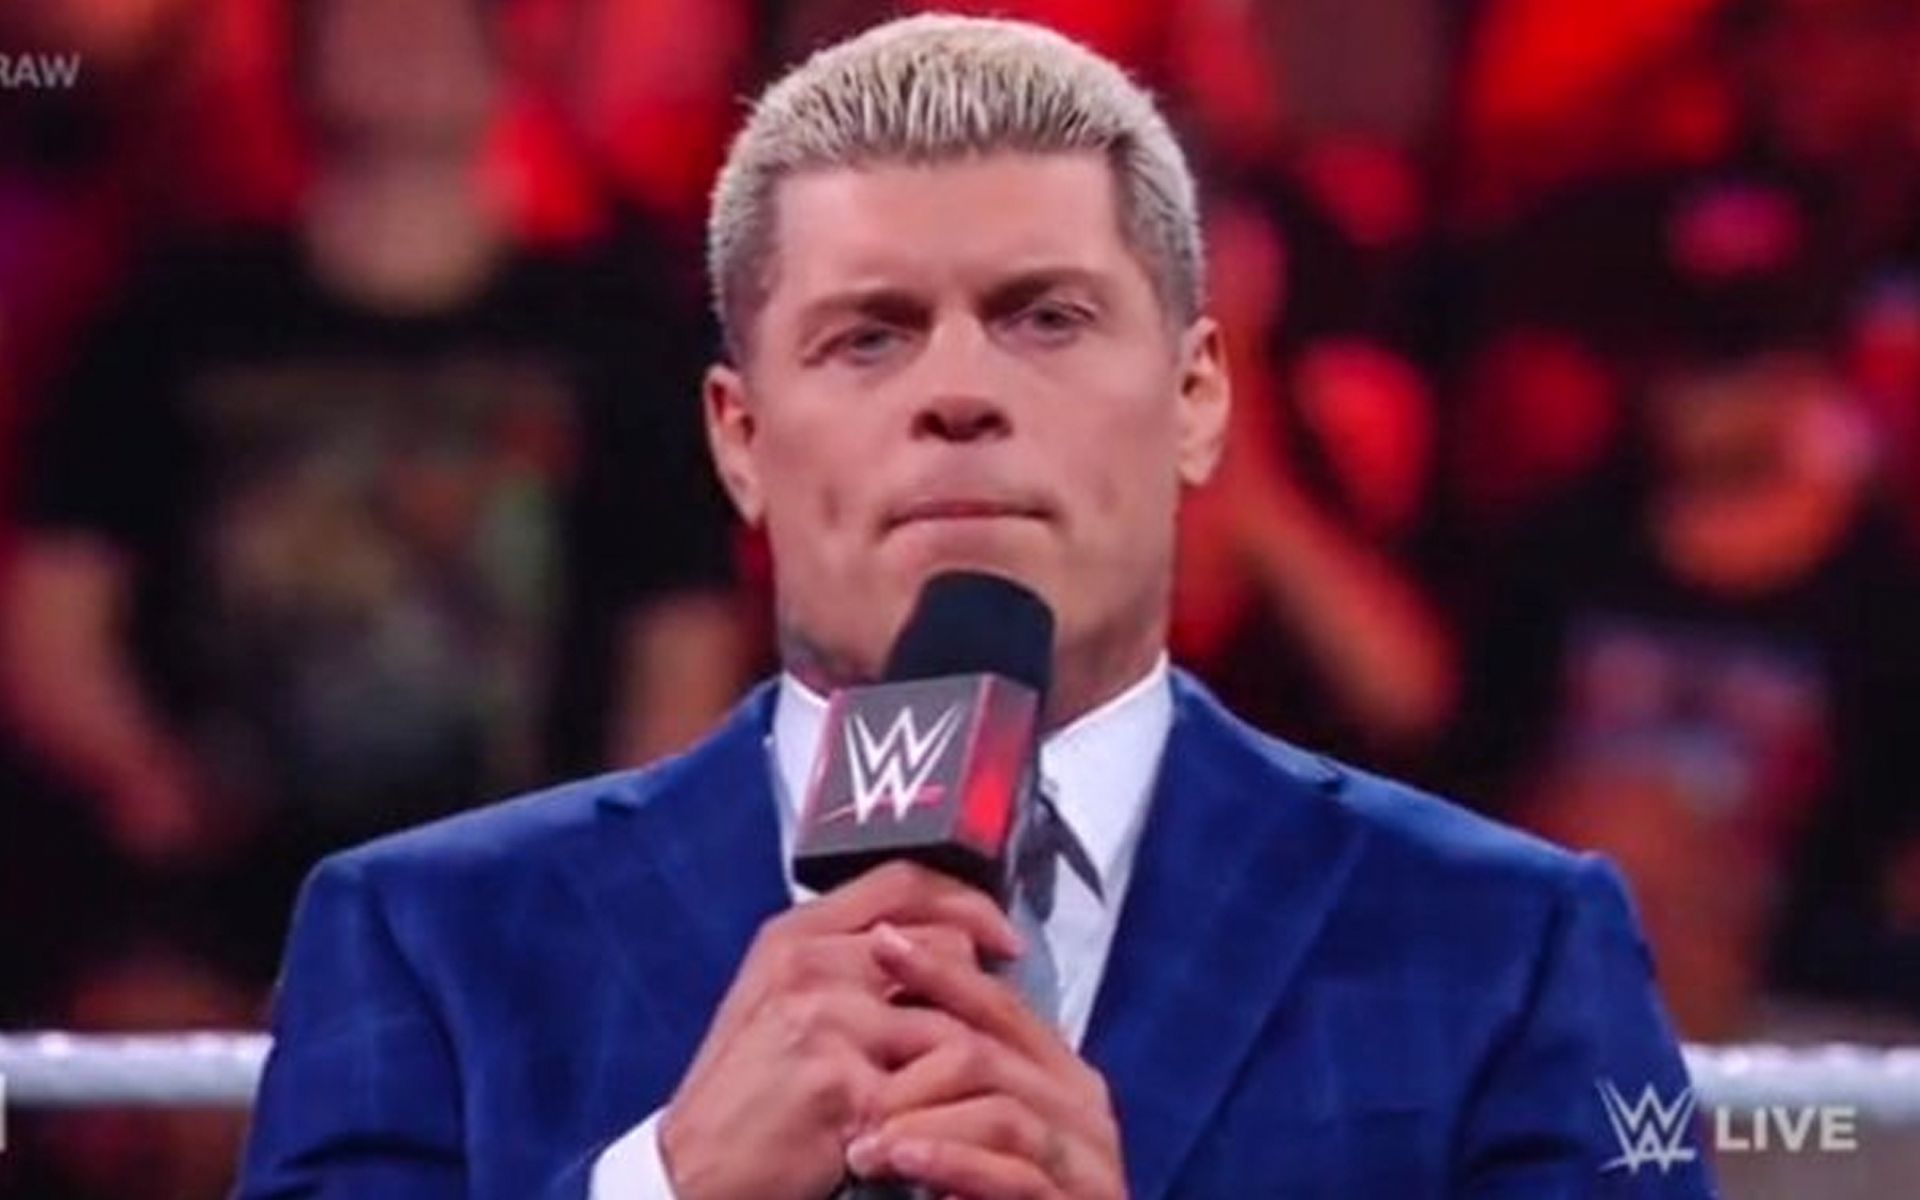 Cody Rhodes challenges Brock Lesnar to a rubber match at SummerSlam 2023